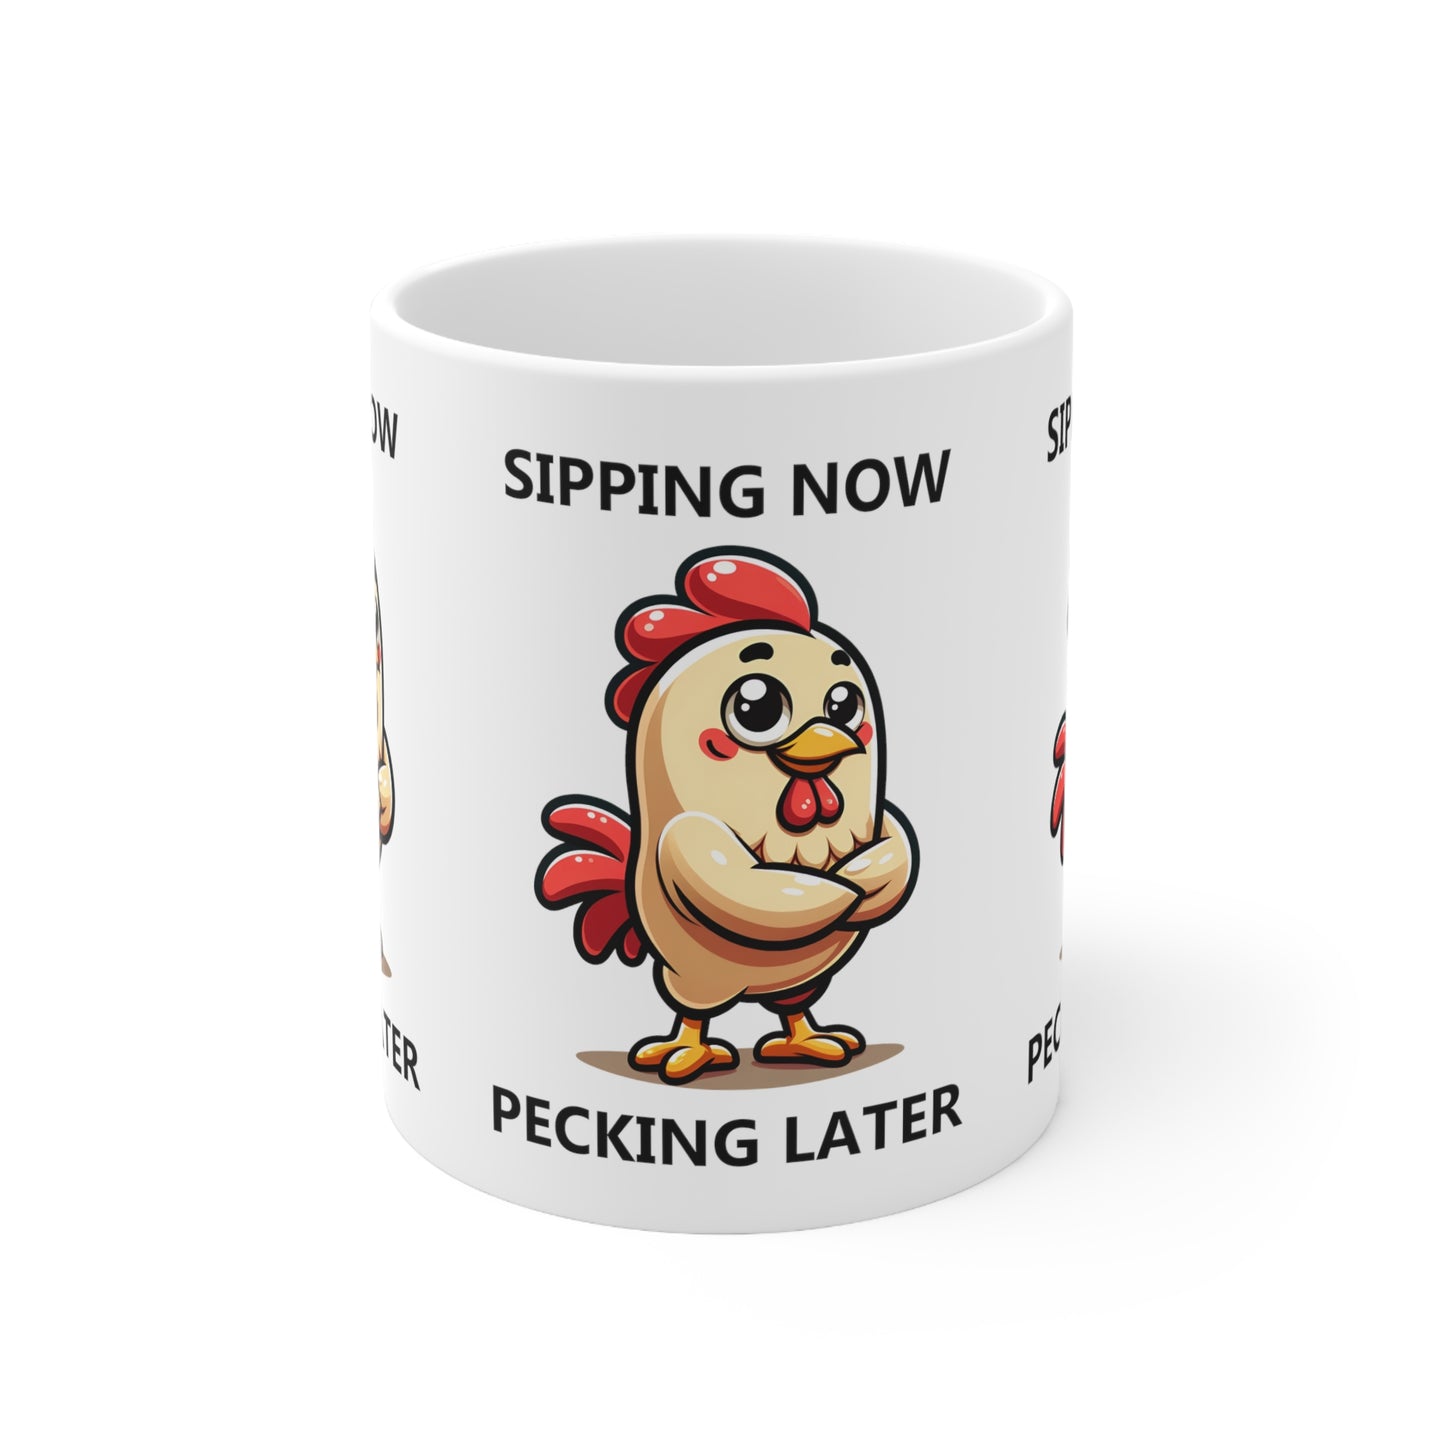 Funny Coffee Mug, Sipping Pecking Chicken Art Ceramic Cup Tea Office Boss Coworker Friend Unique Microwave Safe Novelty Cool Gift